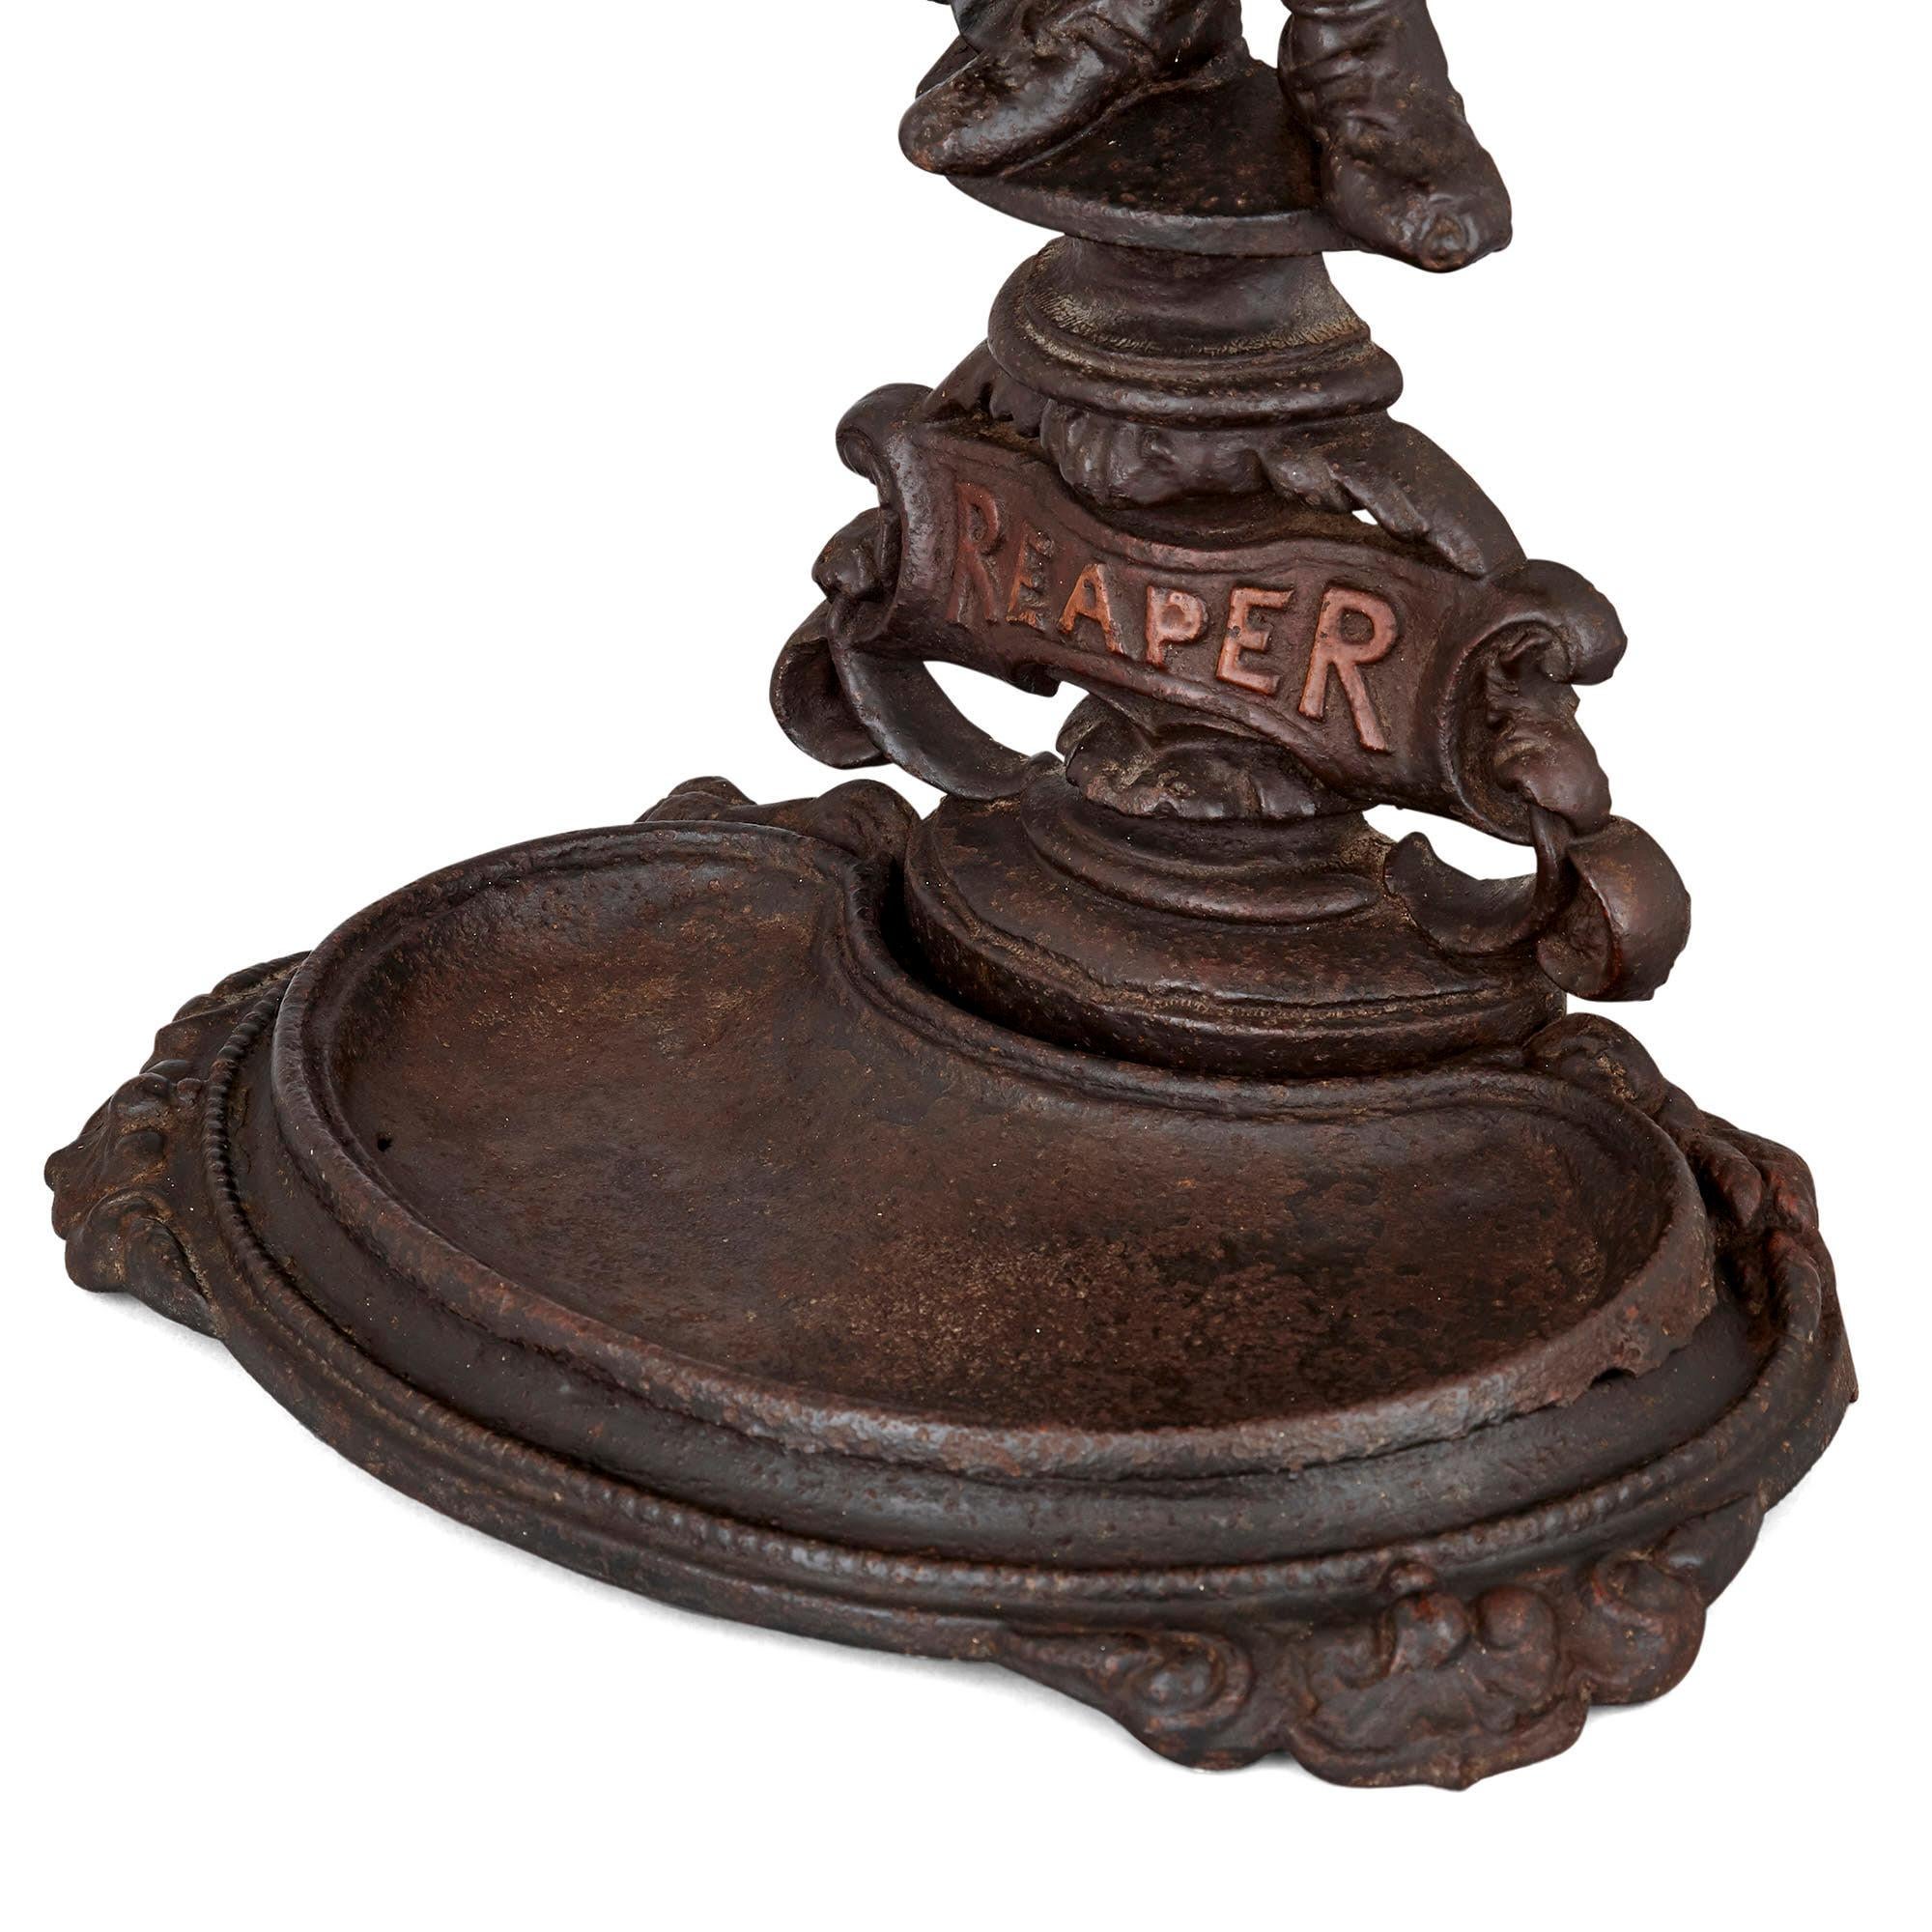 This figure carrying wheat on his back is made of cast iron, written on its base is 'Reaper'. Figures such as these were commonly found in late Victorian houses to hold walking sticks and umbrellas.
English, circa 1880
Measures: Height 77cm, width